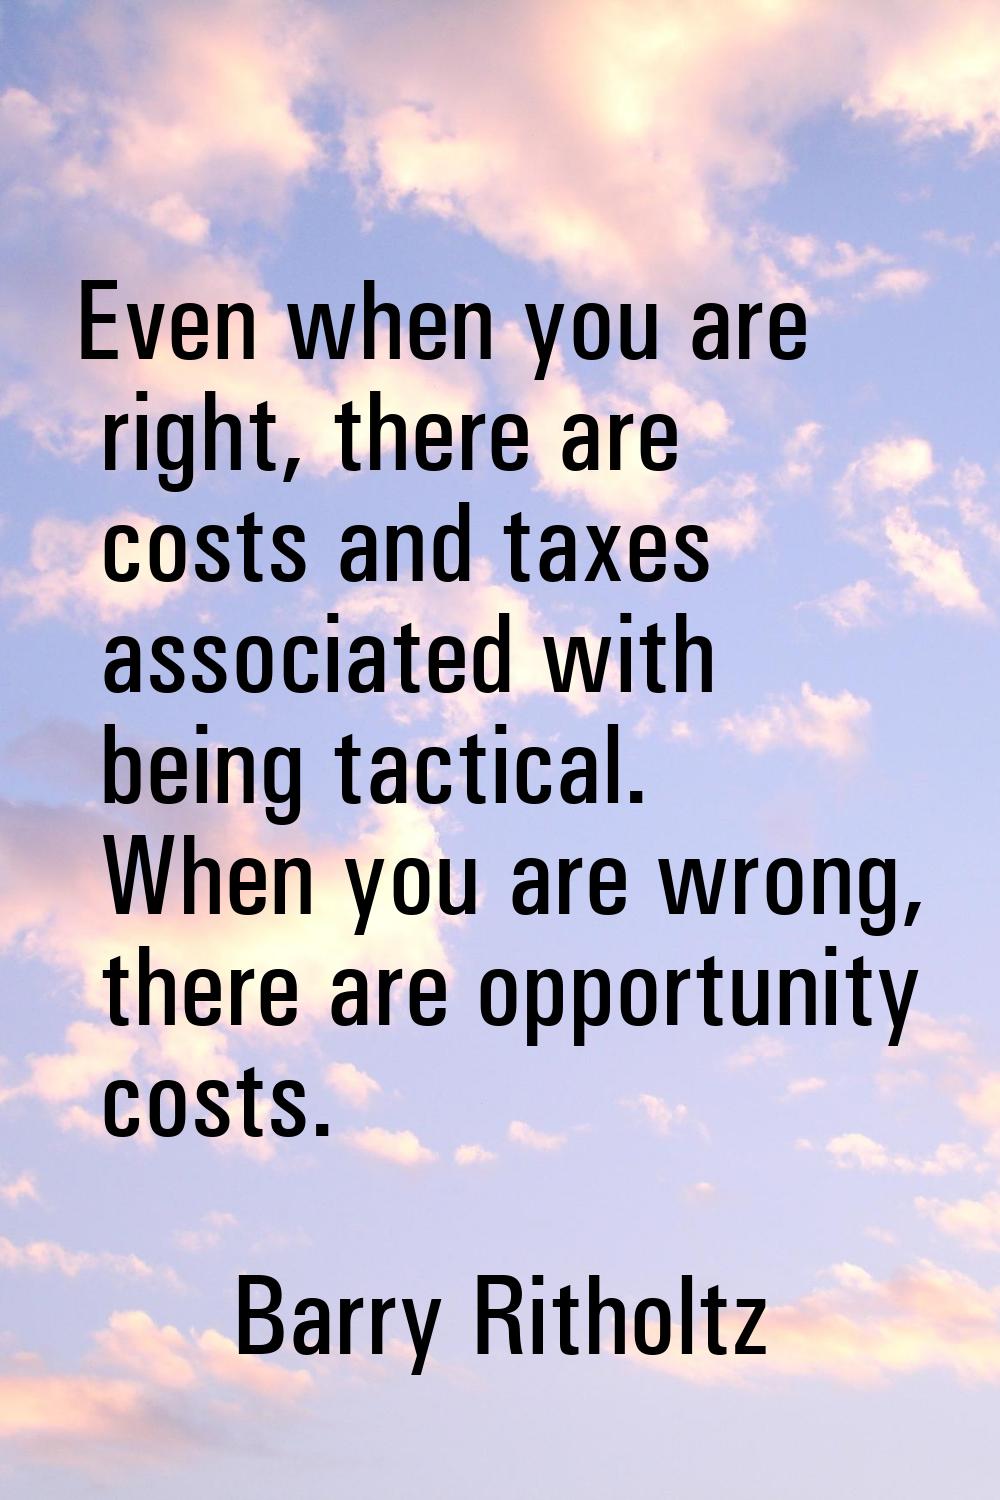 Even when you are right, there are costs and taxes associated with being tactical. When you are wro